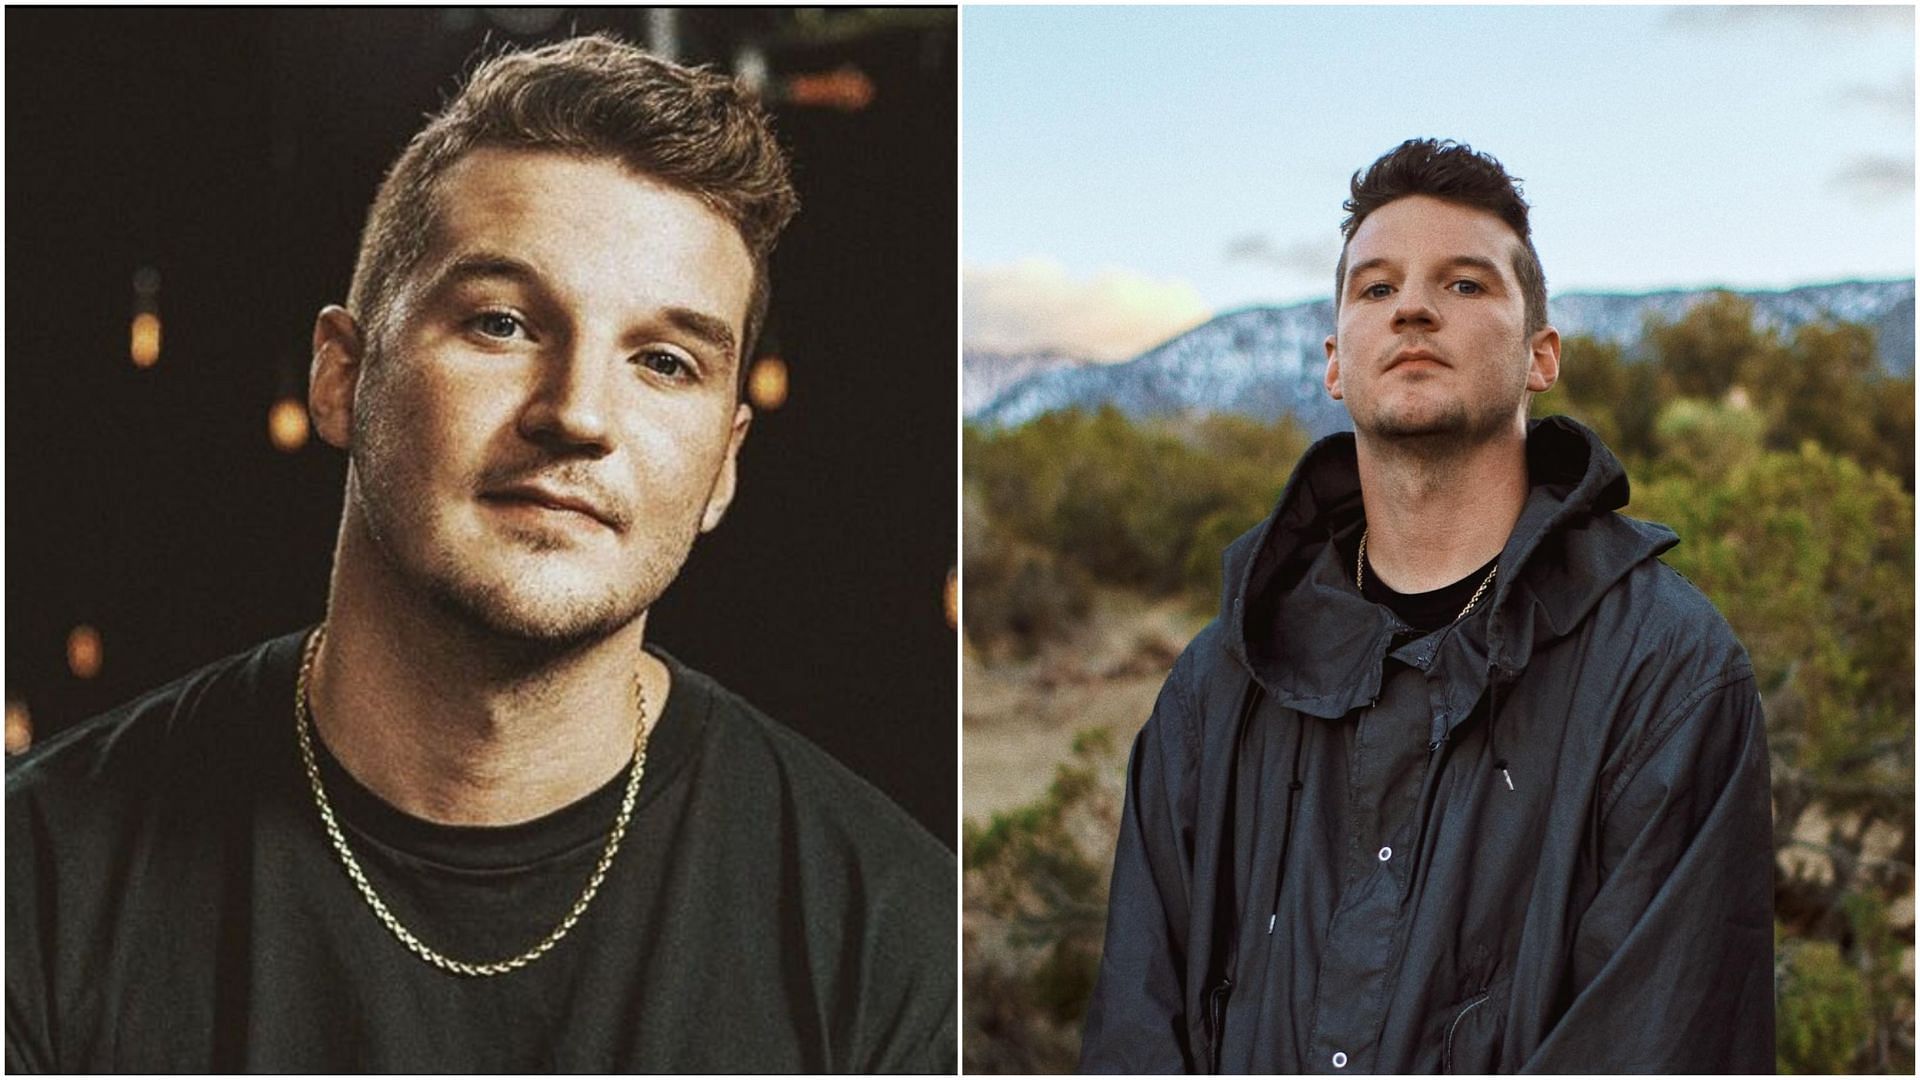 Witt Lowry Tour 2023 Tickets, where to buy, dates, and more